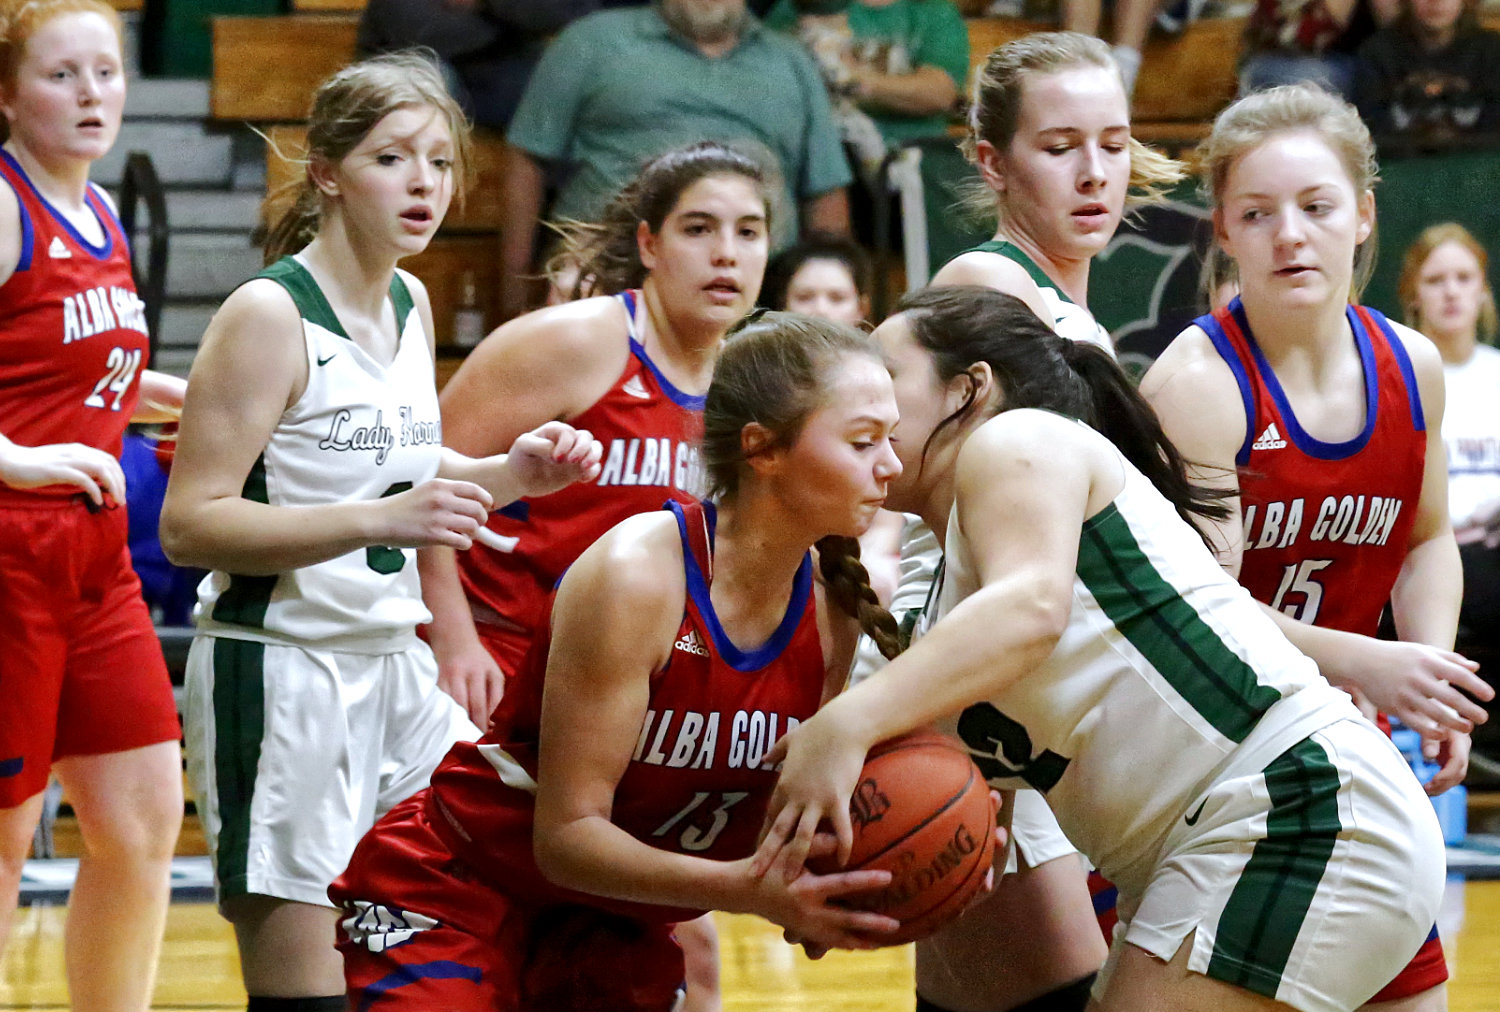 The first half of Alba-Golden’s season finale was a close affair, as illustrated by the struggle for the ball. Lady Panthers photographed (l-r) are Kylie Kennedy, Erin Langston, Kalli Trimble and Cacie Lennon.